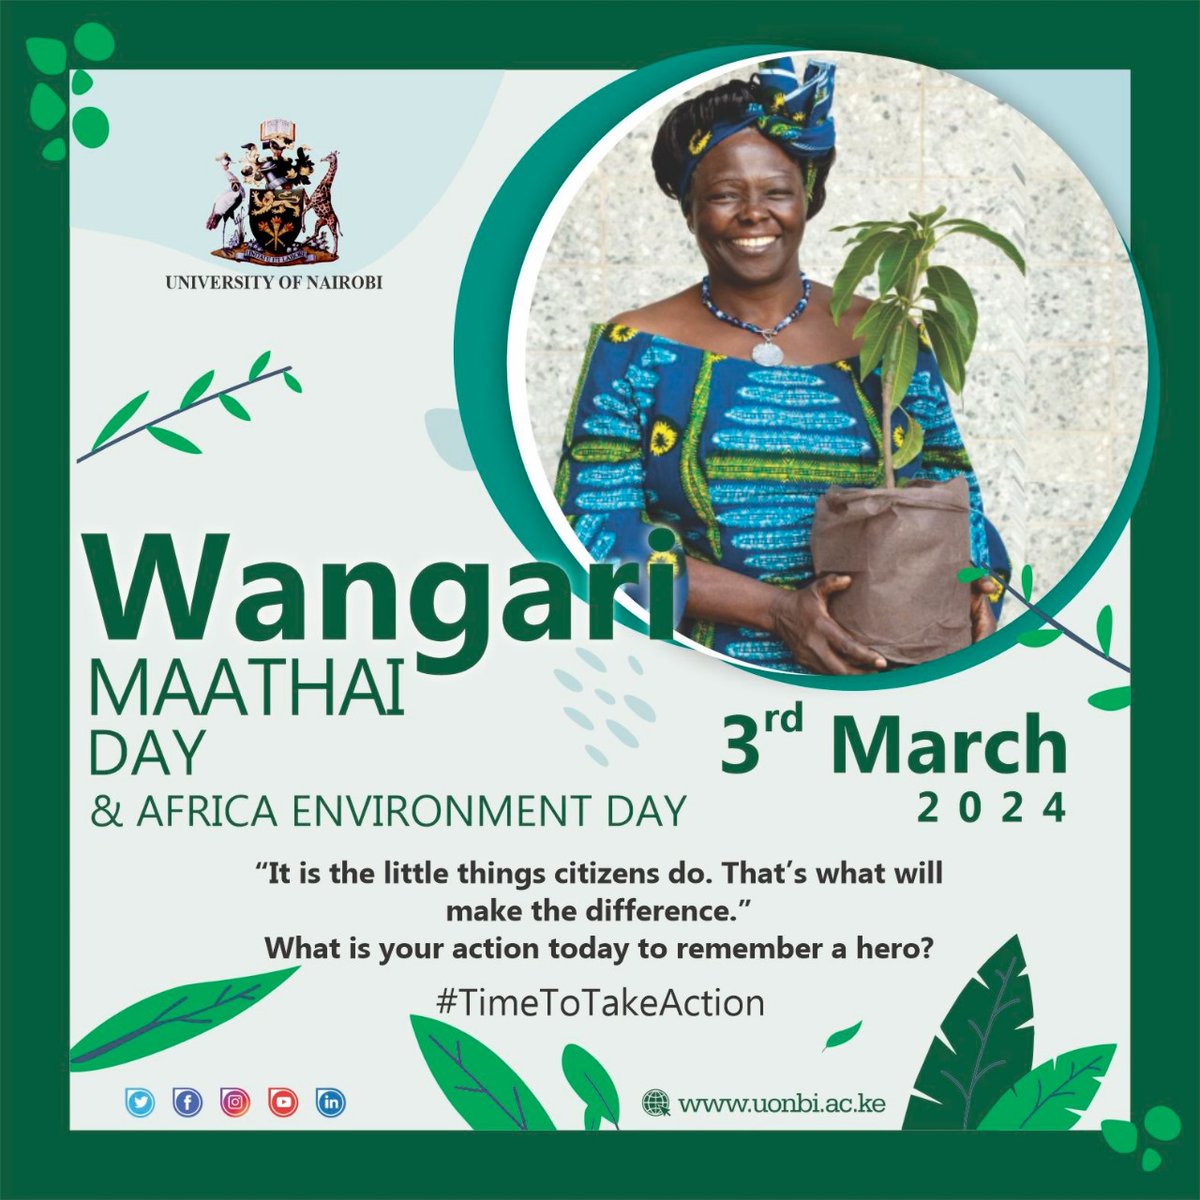 In the words of late Prof. Wangari Maathai, 'Empowerment is the key to unlocking a sustainable environment, You cannot protect the environment unless you empower the people.' #ThrowbackThursday
#WangariMaathaiDay 
#WeAreUoN 
#Timetotakeaction